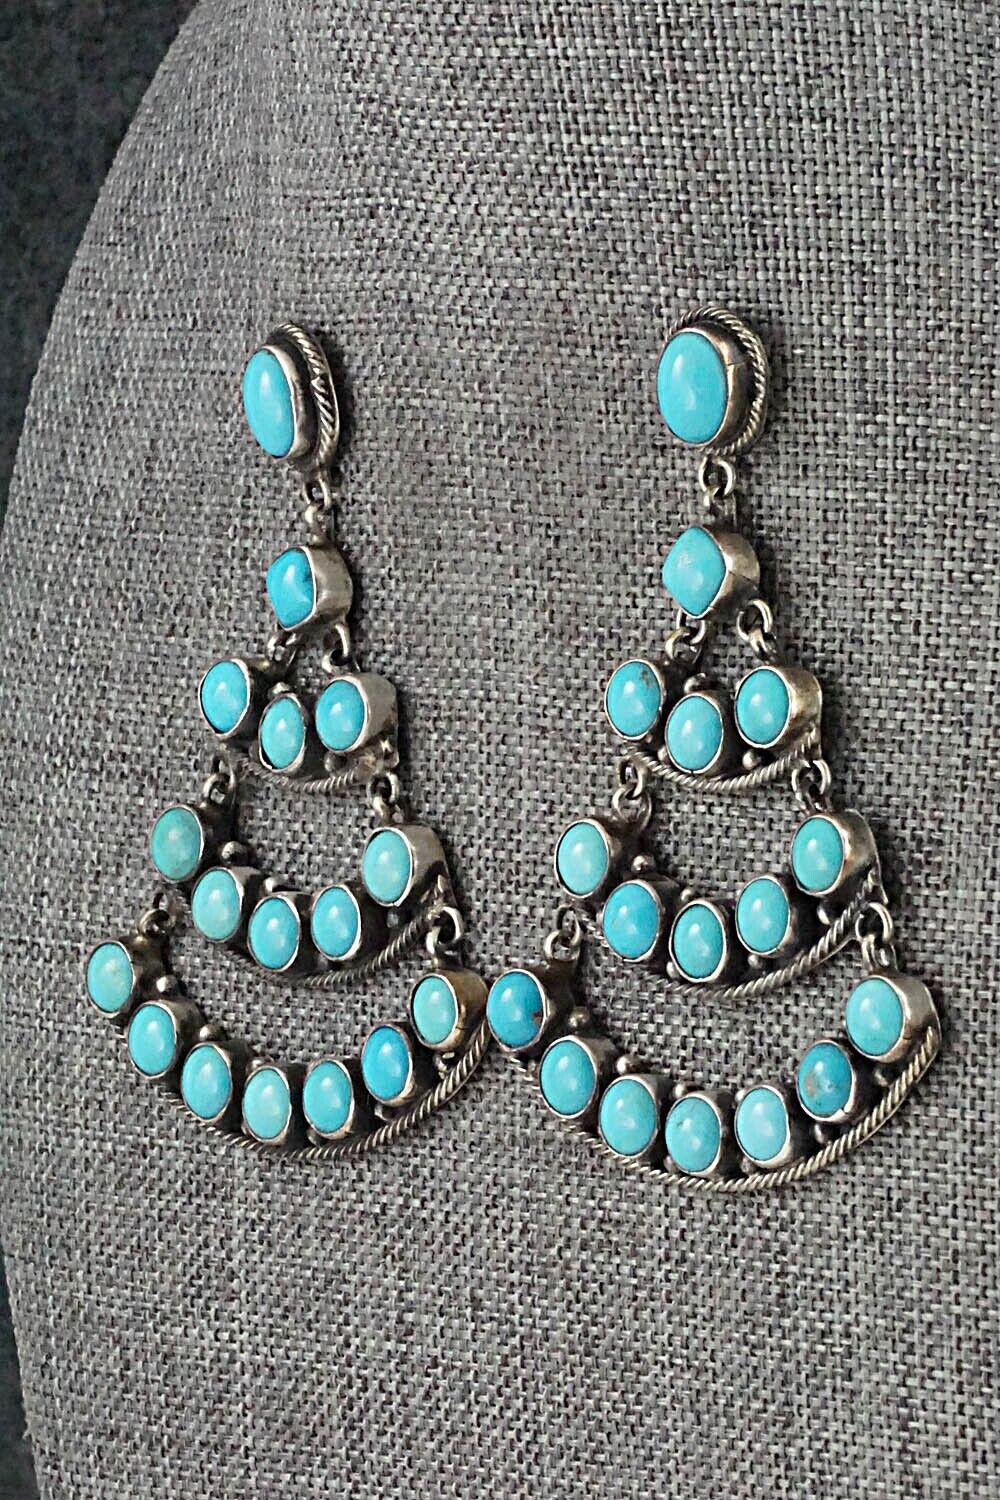 Turquoise & Sterling Silver Earrings - Pansy Johnson